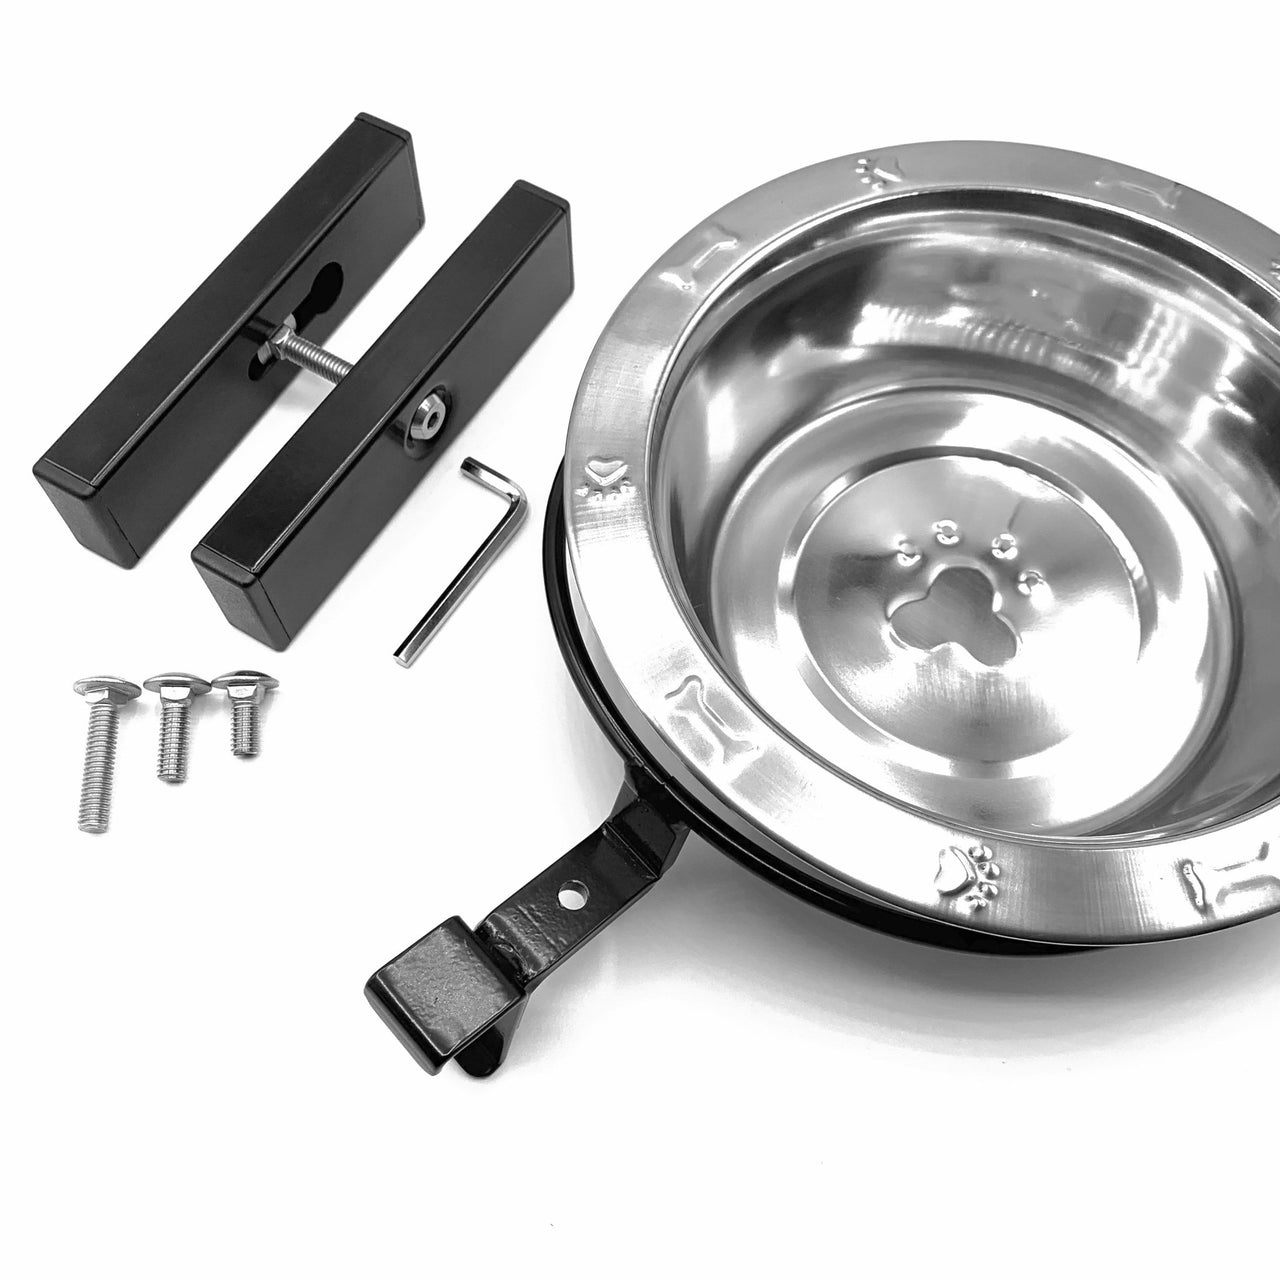 Adjustable Height Dog Bowl Kit Contents